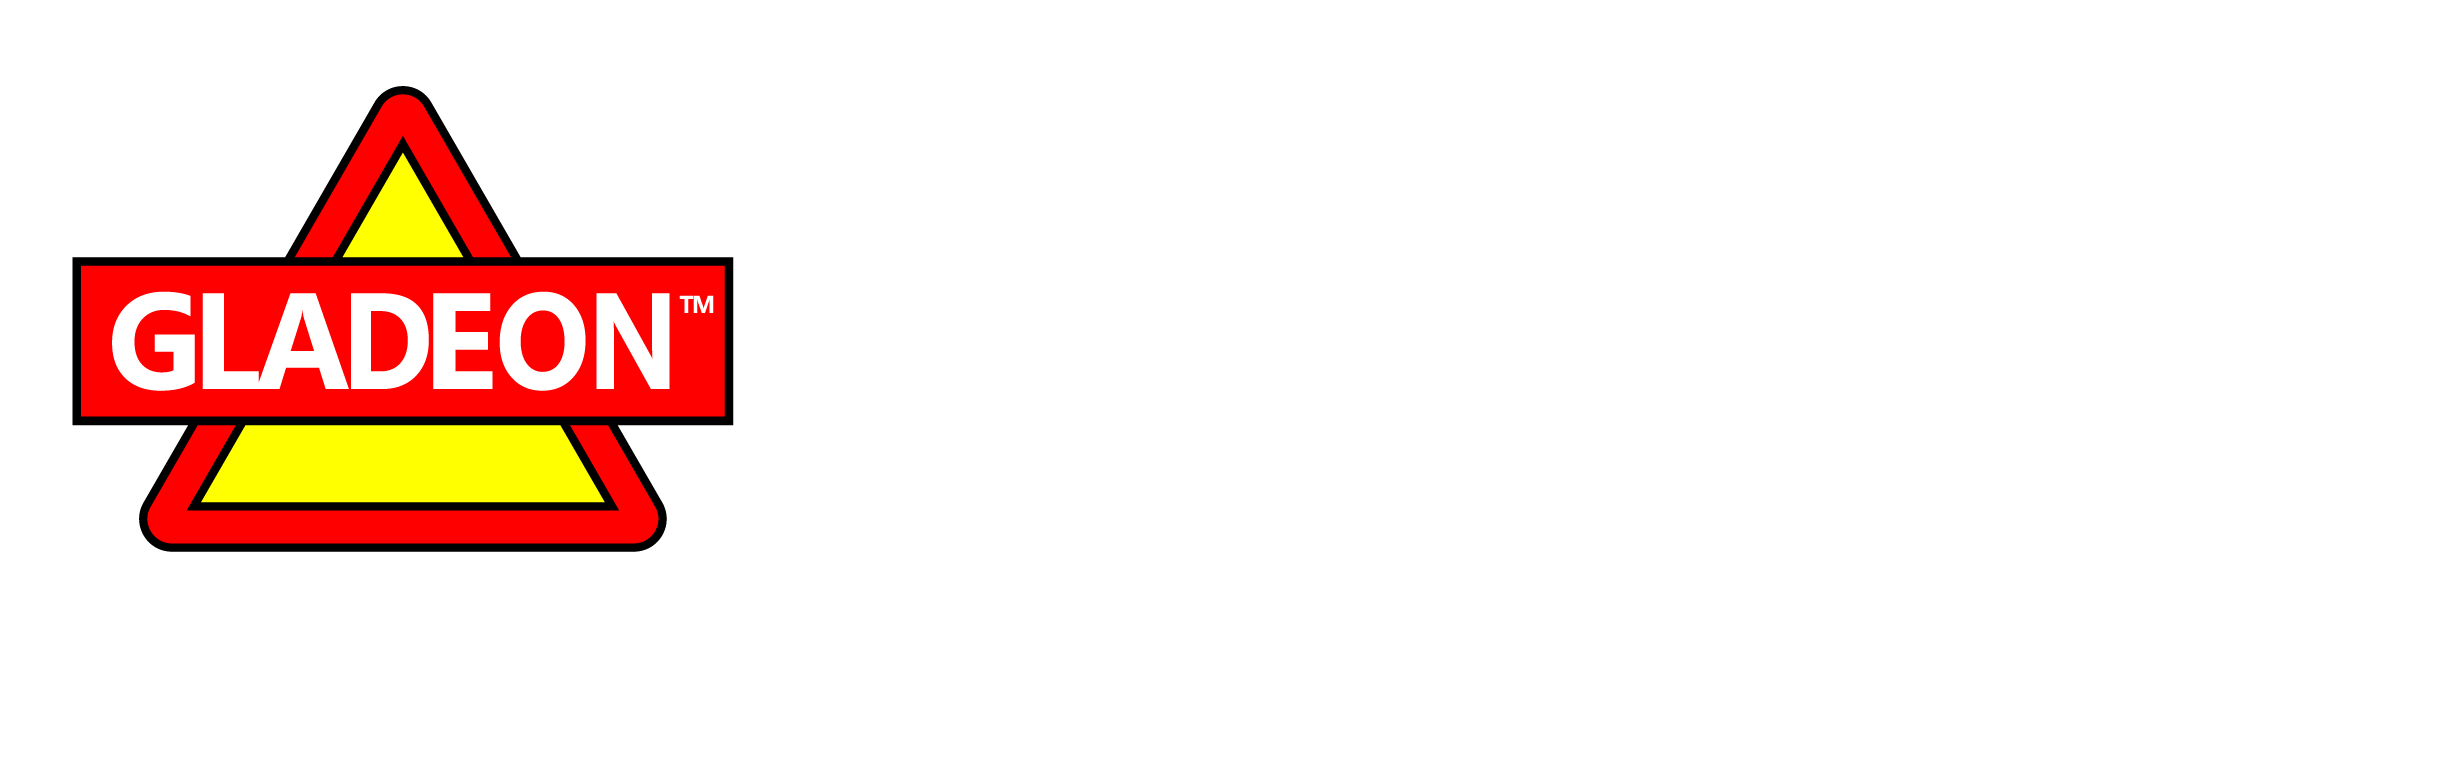 Gladeon Safety Systems